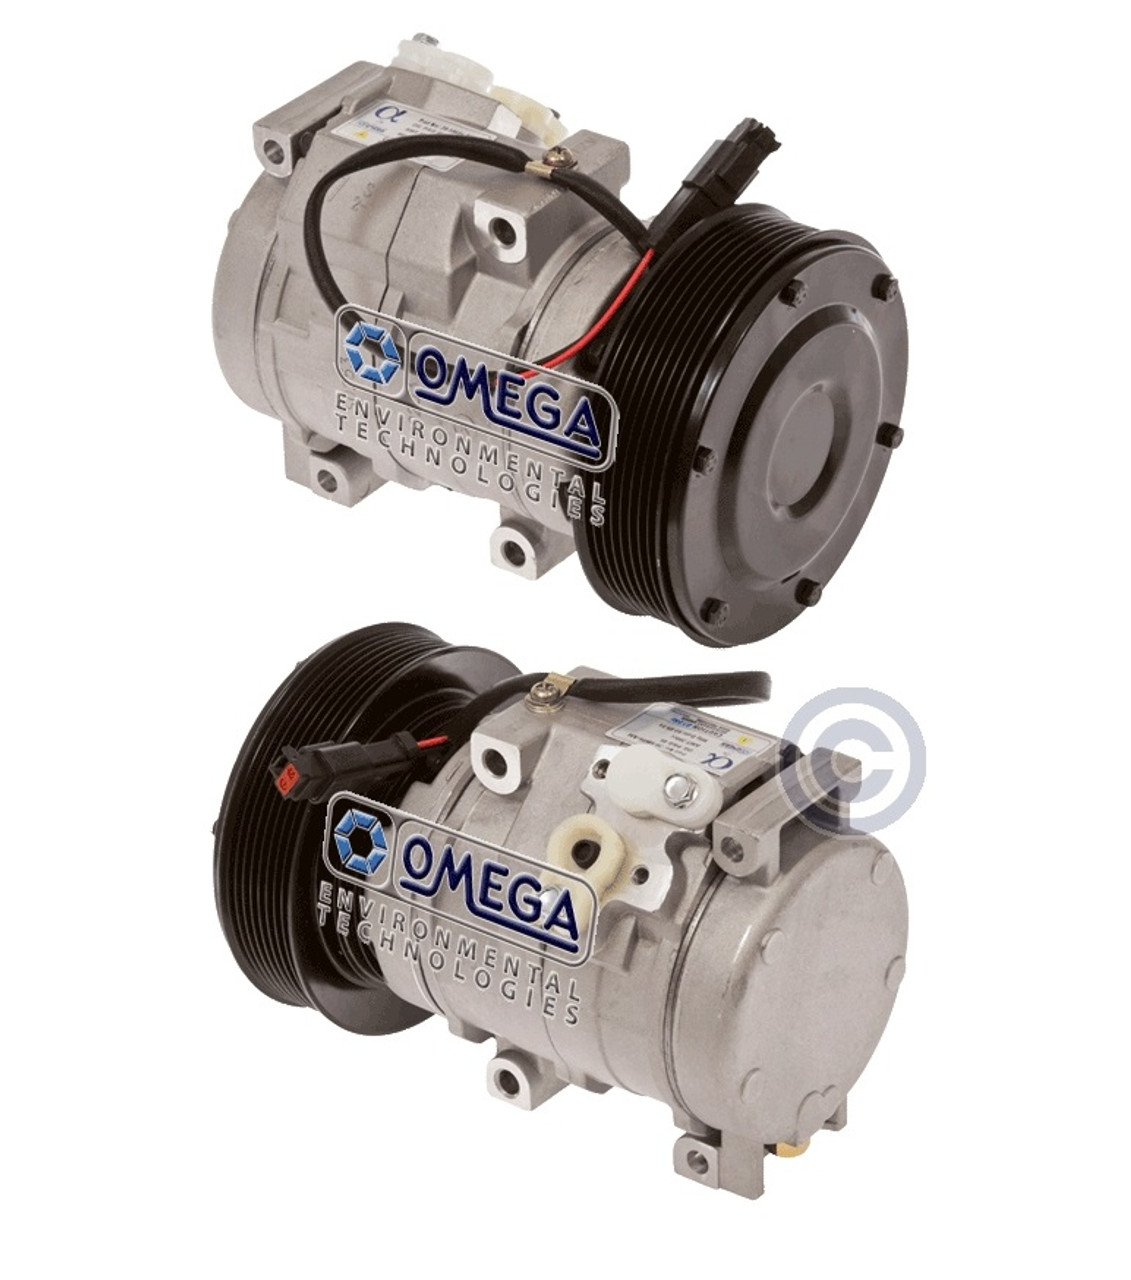 Denso Compressor Model 10S17C 24V with 140mm Clutch and Pad Fitting -  20-14606-AM by Omega